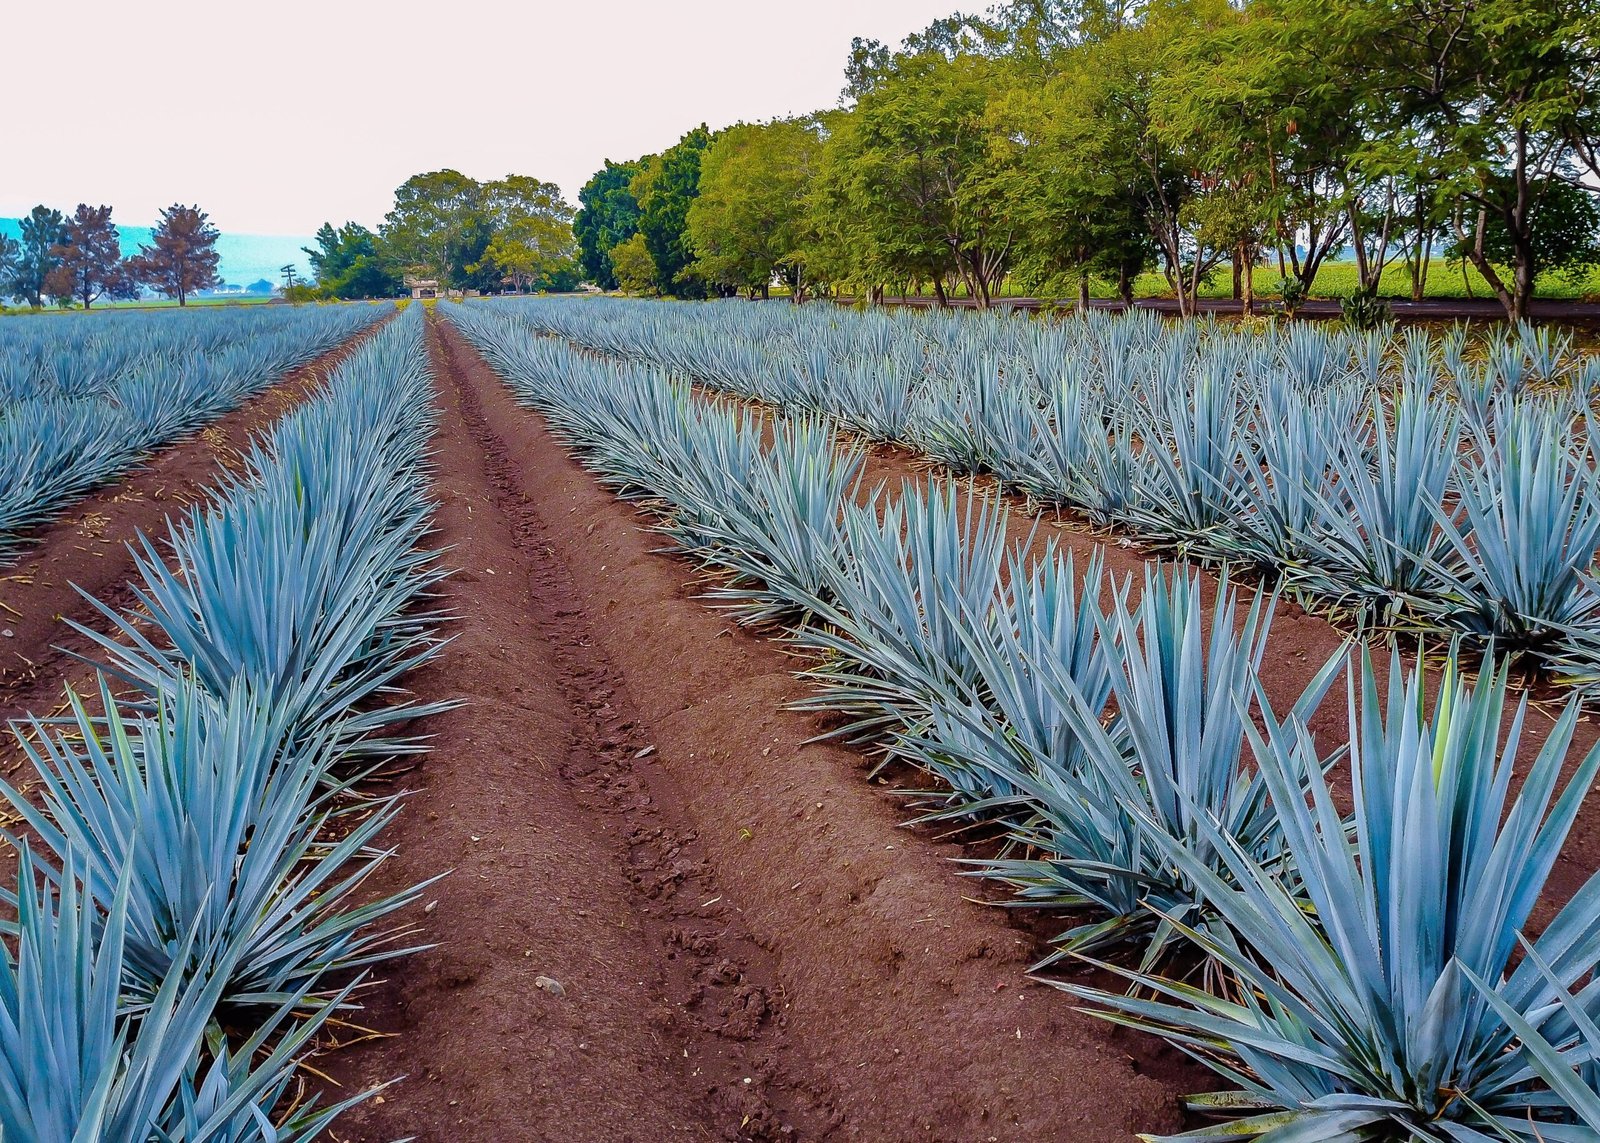 Mexico’s sustainability crisis puts blue agave and bats in jeopardy, warns Earth.com